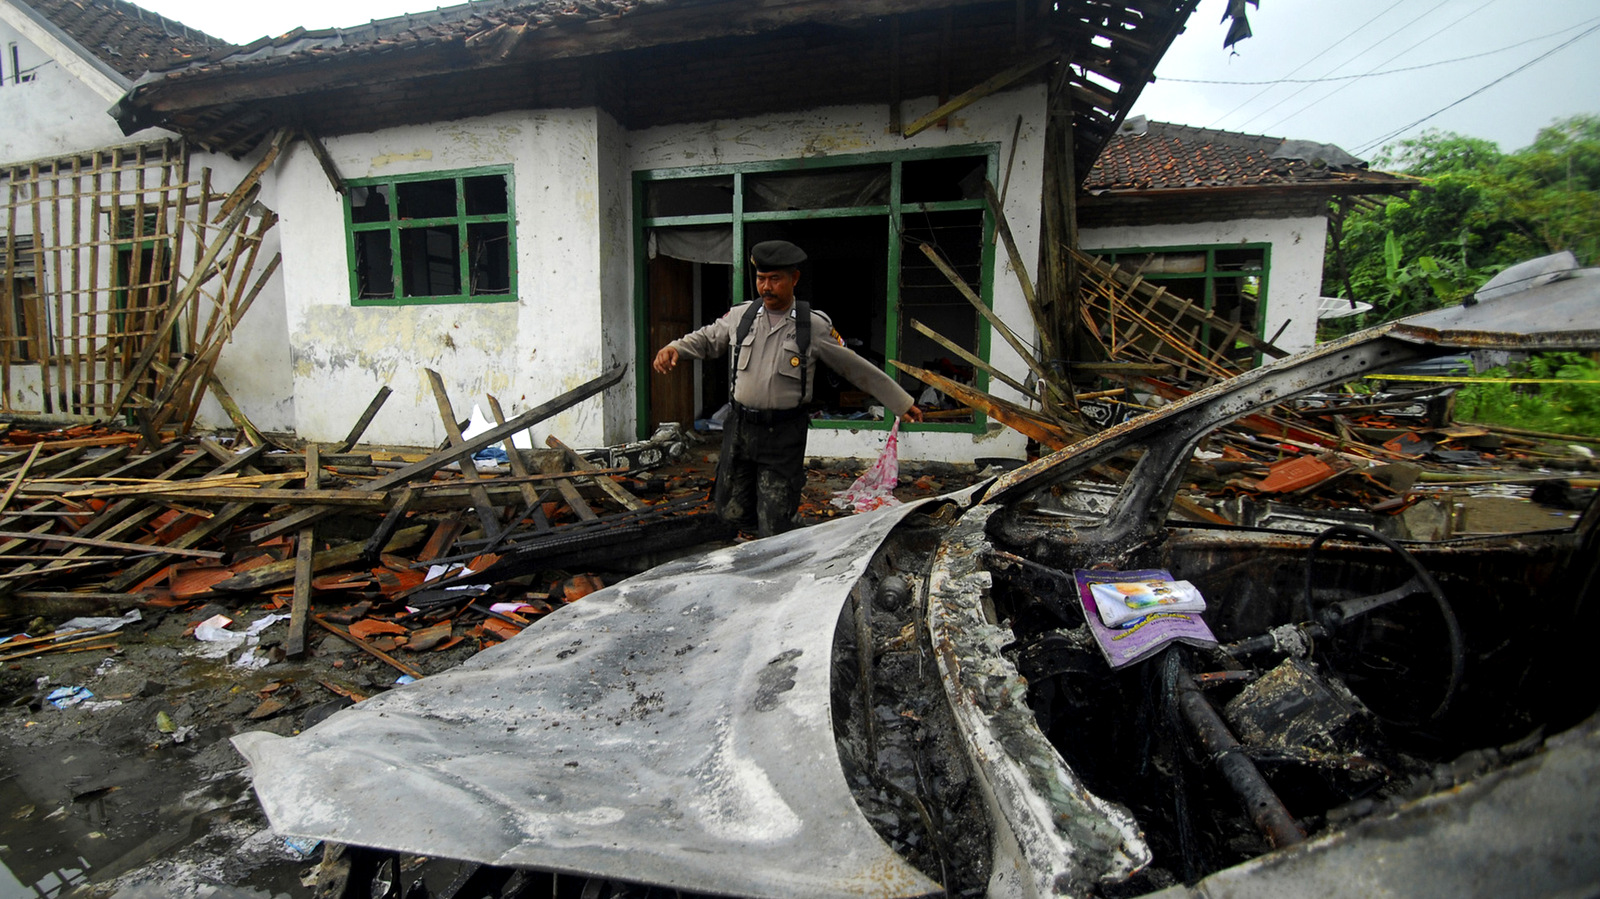 A police officer inspects the damage at the house of a member of Ahmadiyah sect after it was attacked by a Sunni mob in Pandeglang, Banten province, Indonesia, Monday, Feb. 7, 2011. The machete-wielding mob on Sunday attacked the home of the minority sect leader in central Indonesia, killing three and wounding six others, police and witnesses said. (AP Photo)